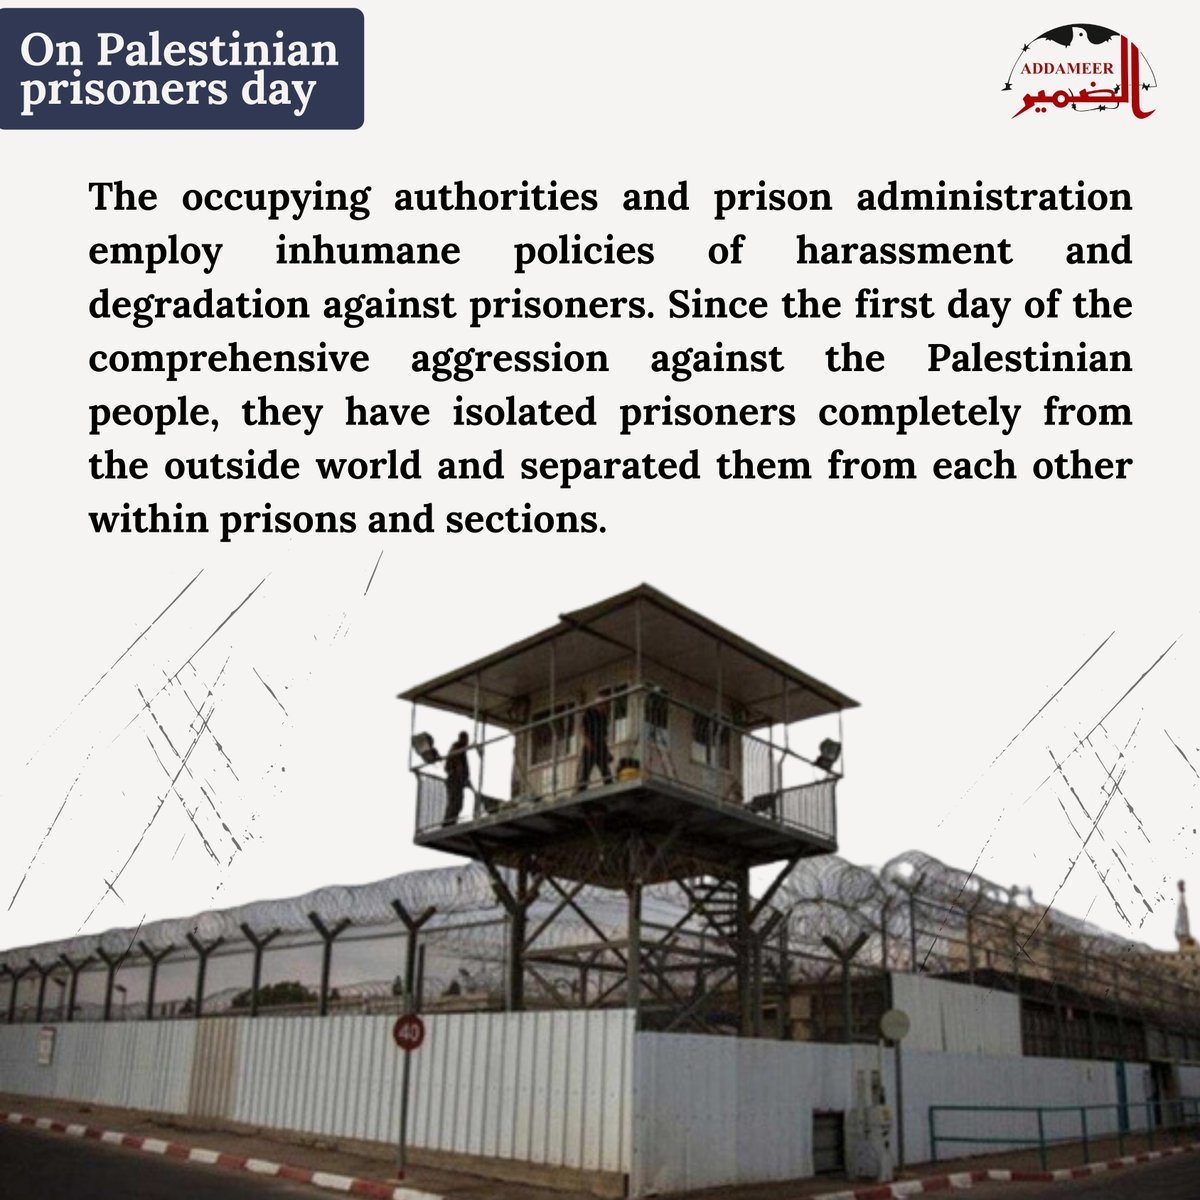 On Palestinian Prisoners Day.. Since the first day of the comprehensive aggression against the Palestinian people, they have isolated prisoners completely from the outside world and separated them from each other within prisons and sections. #PalestinianPrisonersDay #April17